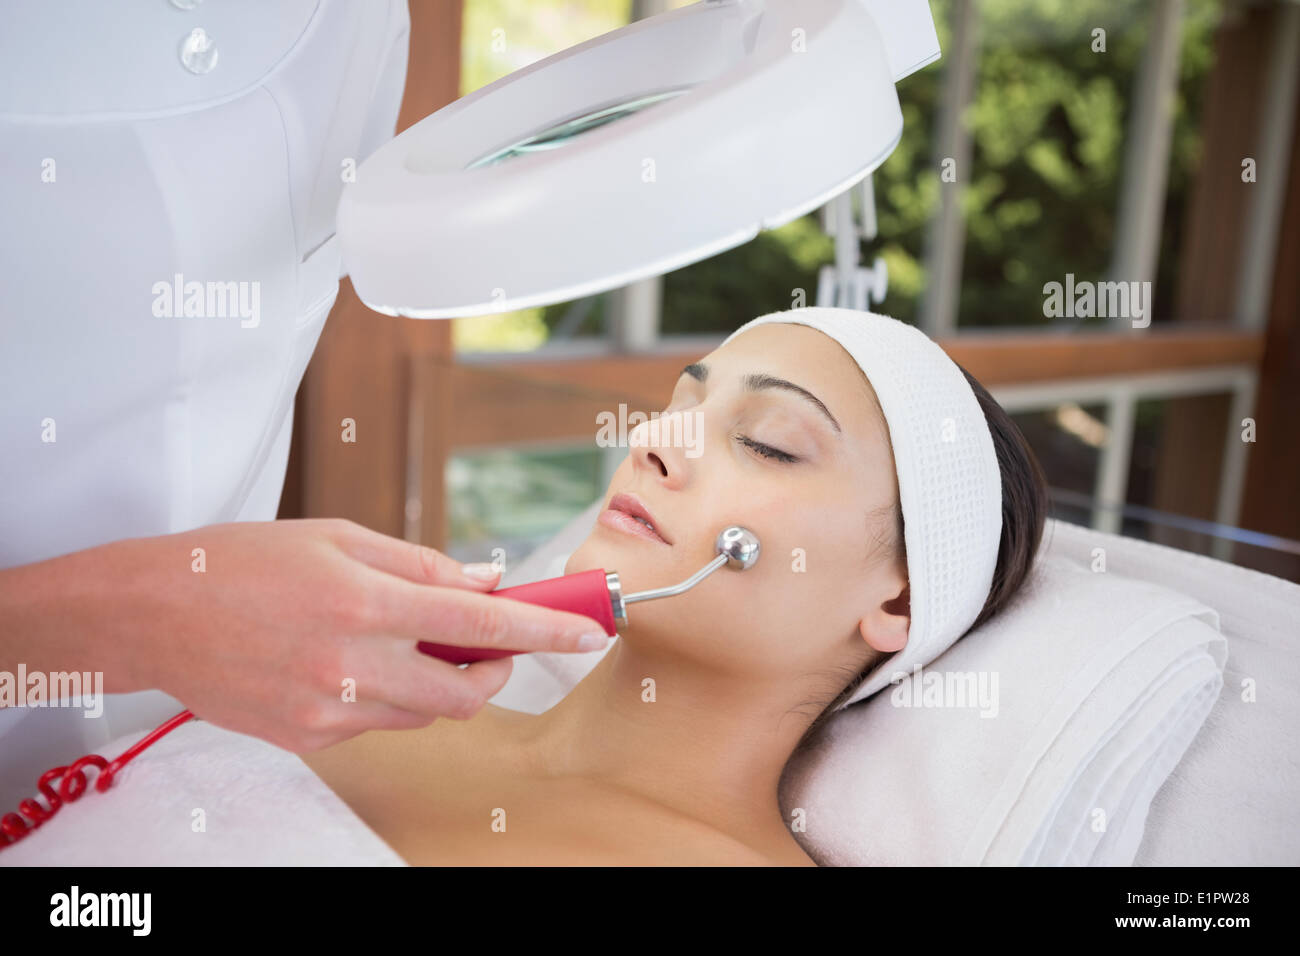 Peaceful brunette getting micro dermabrasion from beauty therapist Stock Photo